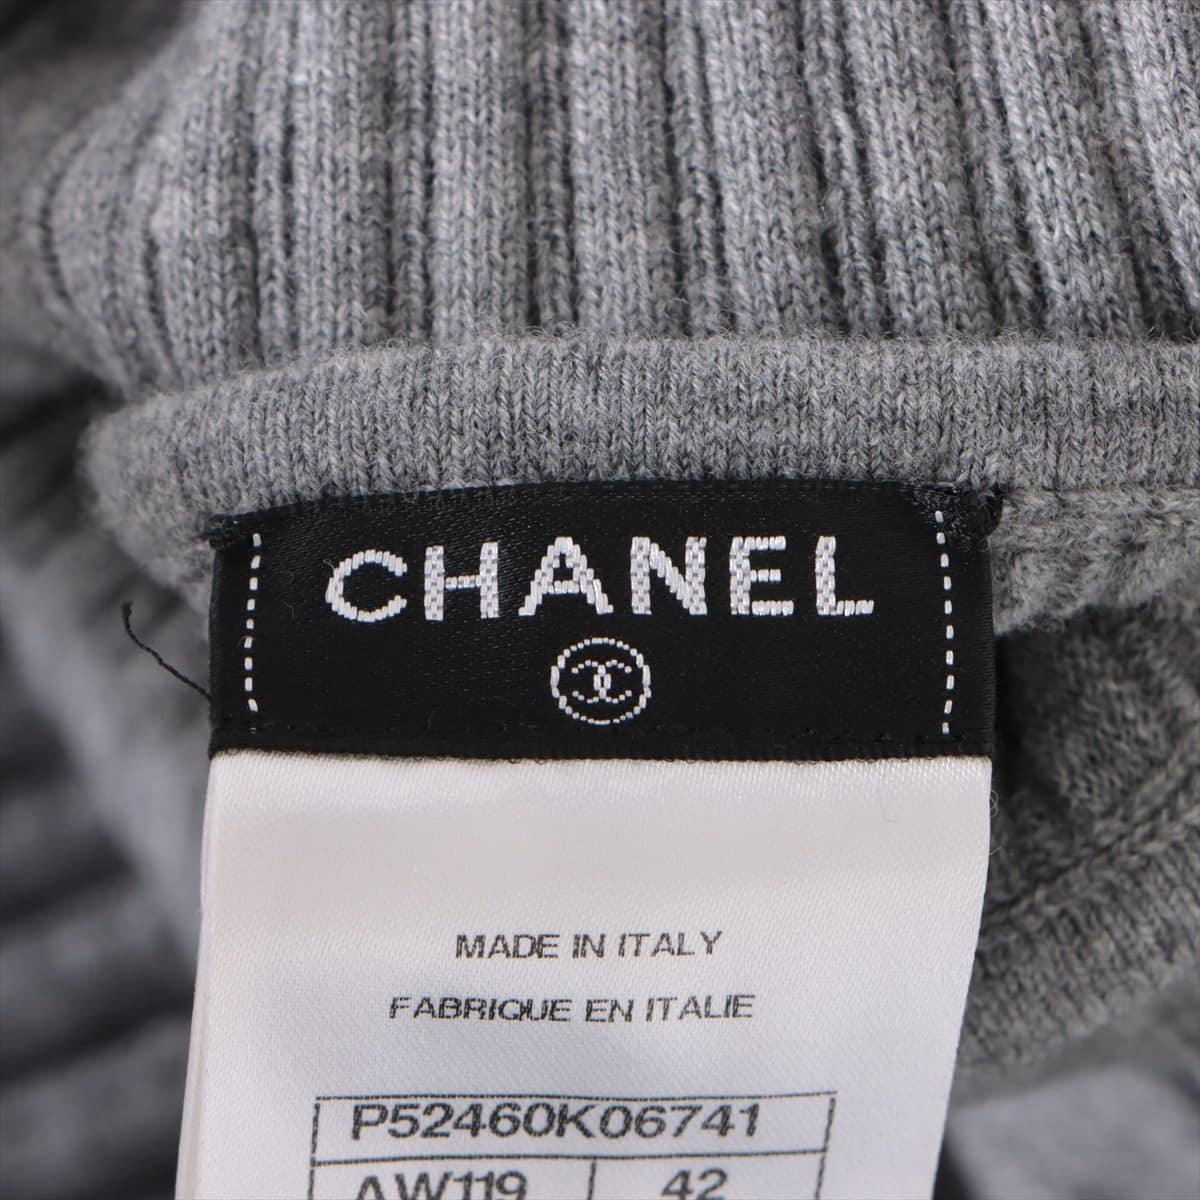 Chanel Coco Button P52 Wool Knit dress 42 Ladies' Grey